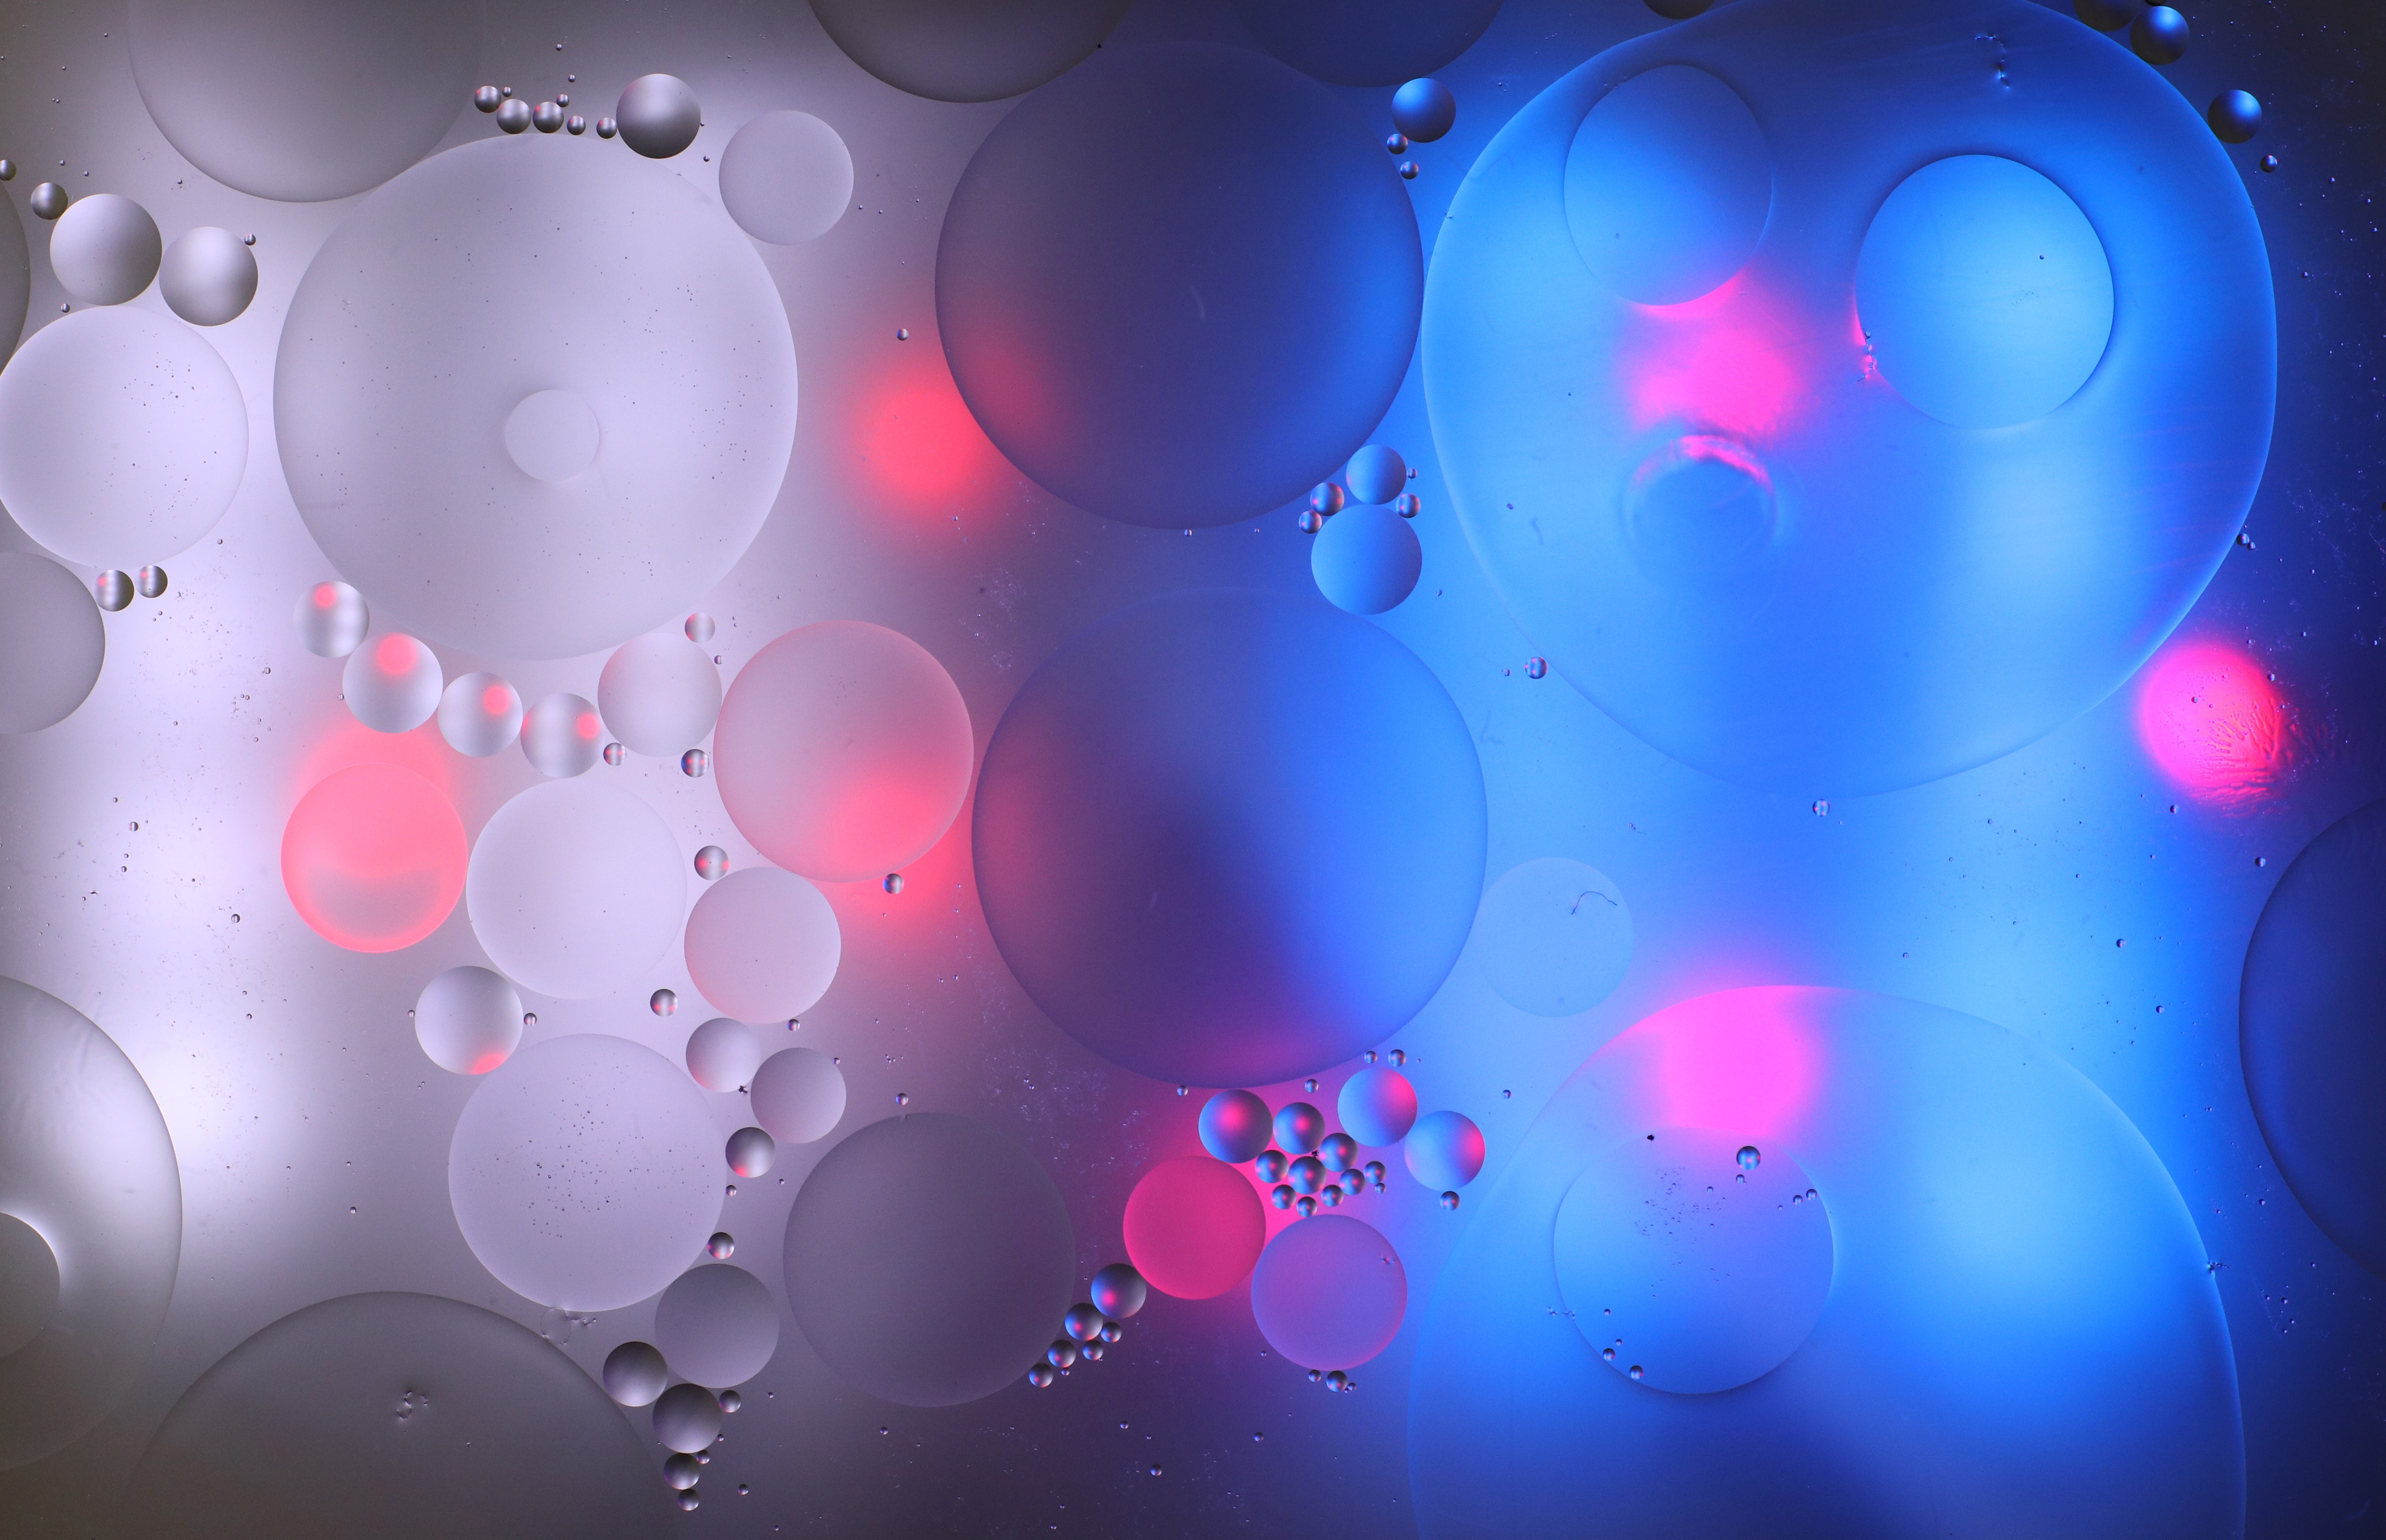 Gradient circles, abstract, water, bubbles Free Stock Photos